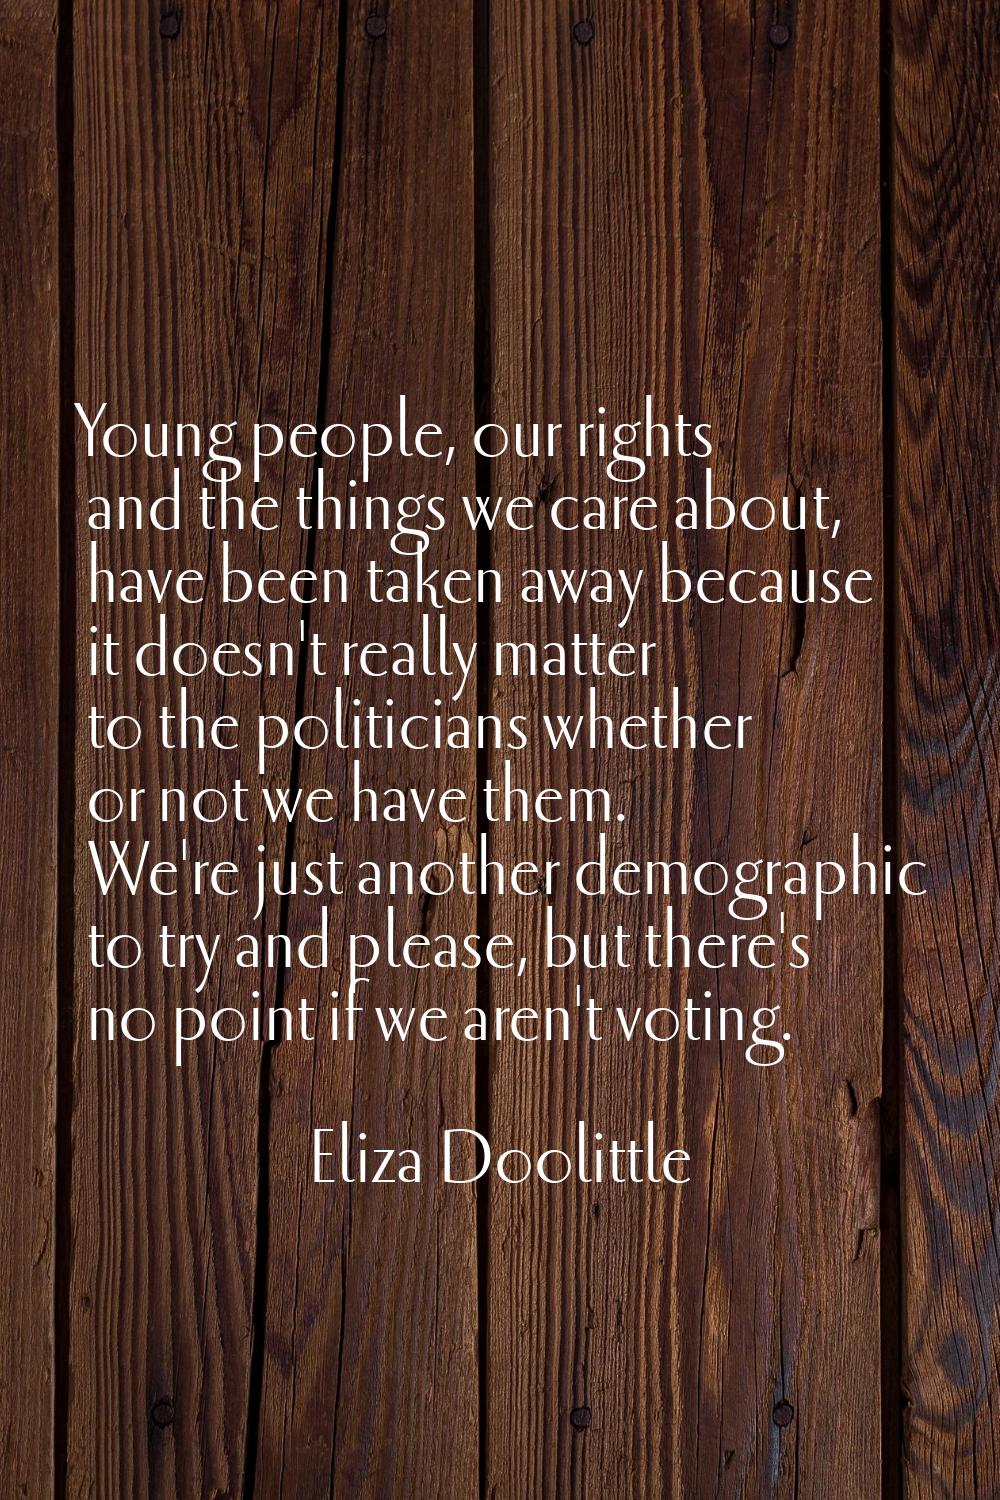 Young people, our rights and the things we care about, have been taken away because it doesn't real